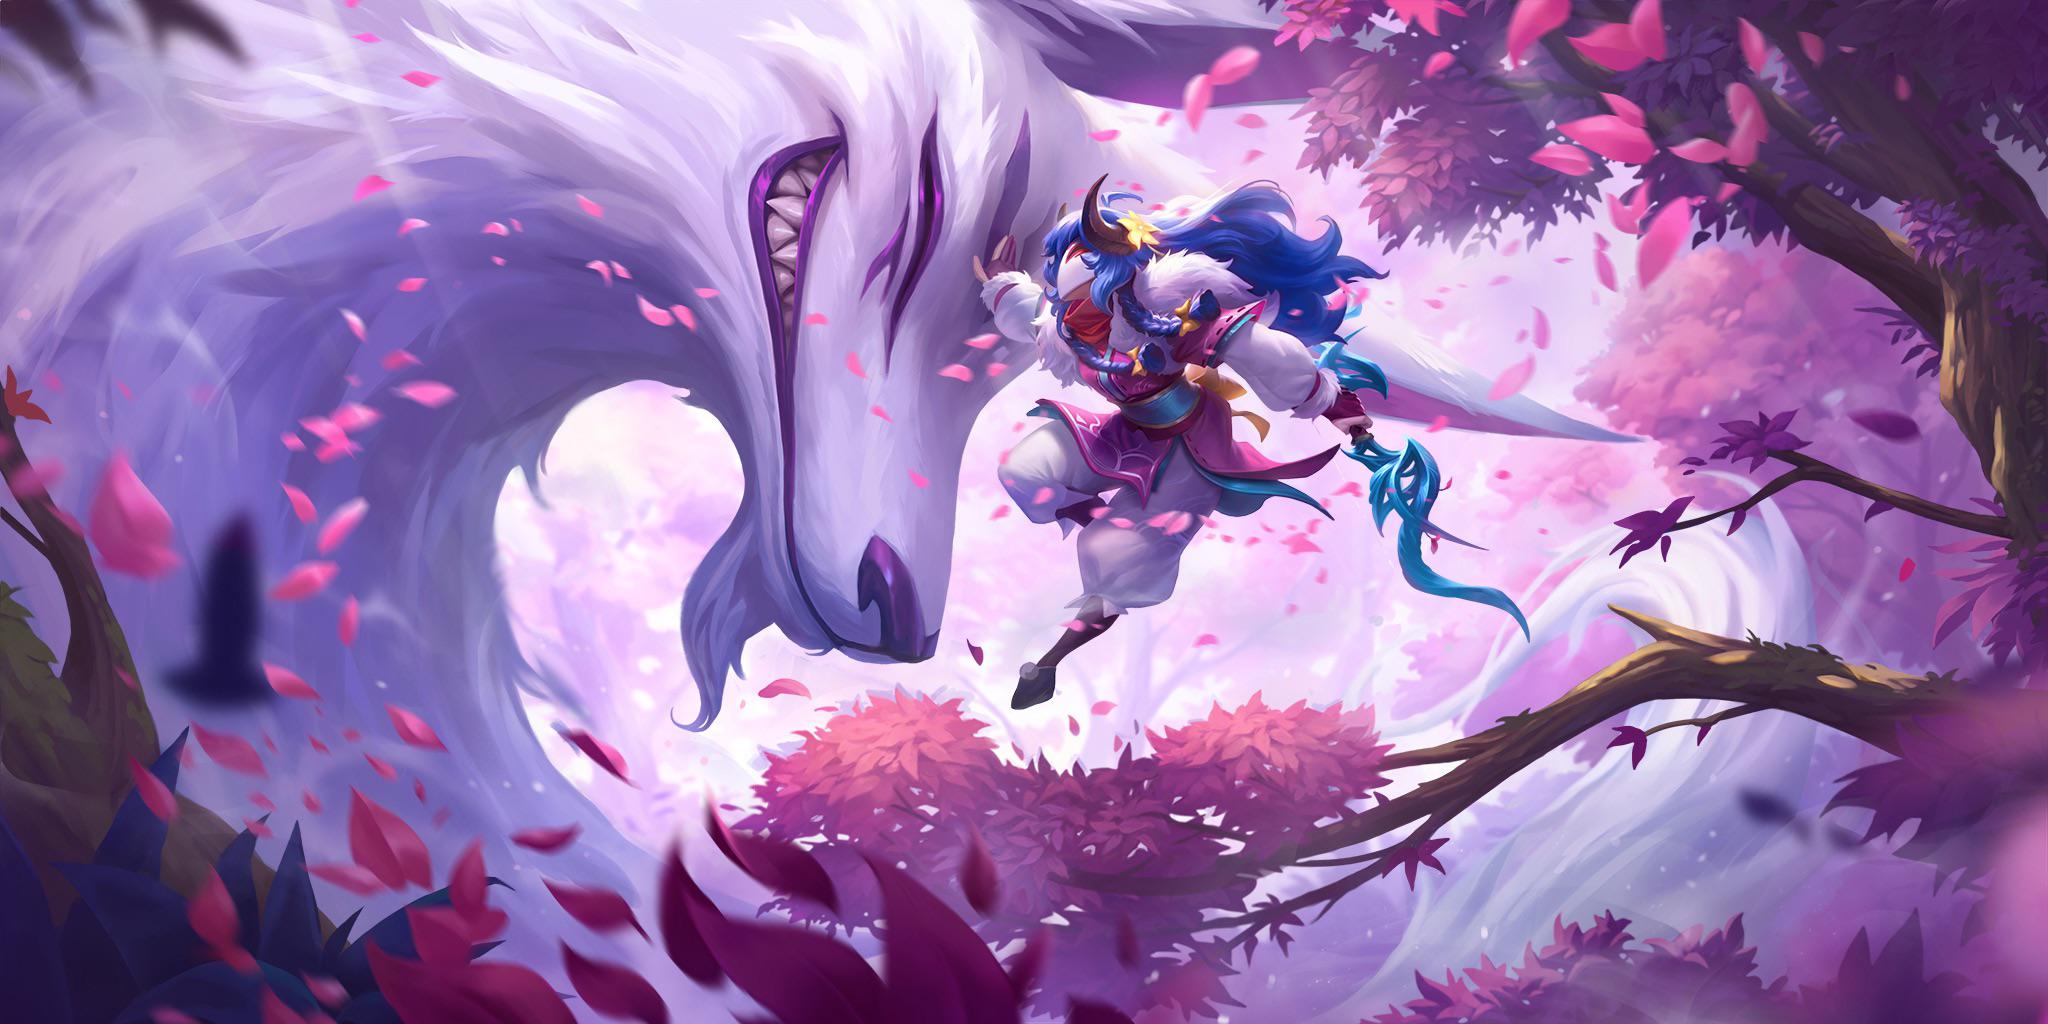 Spirit Blossom Kindred Is Being Added to Legends of Runeterra